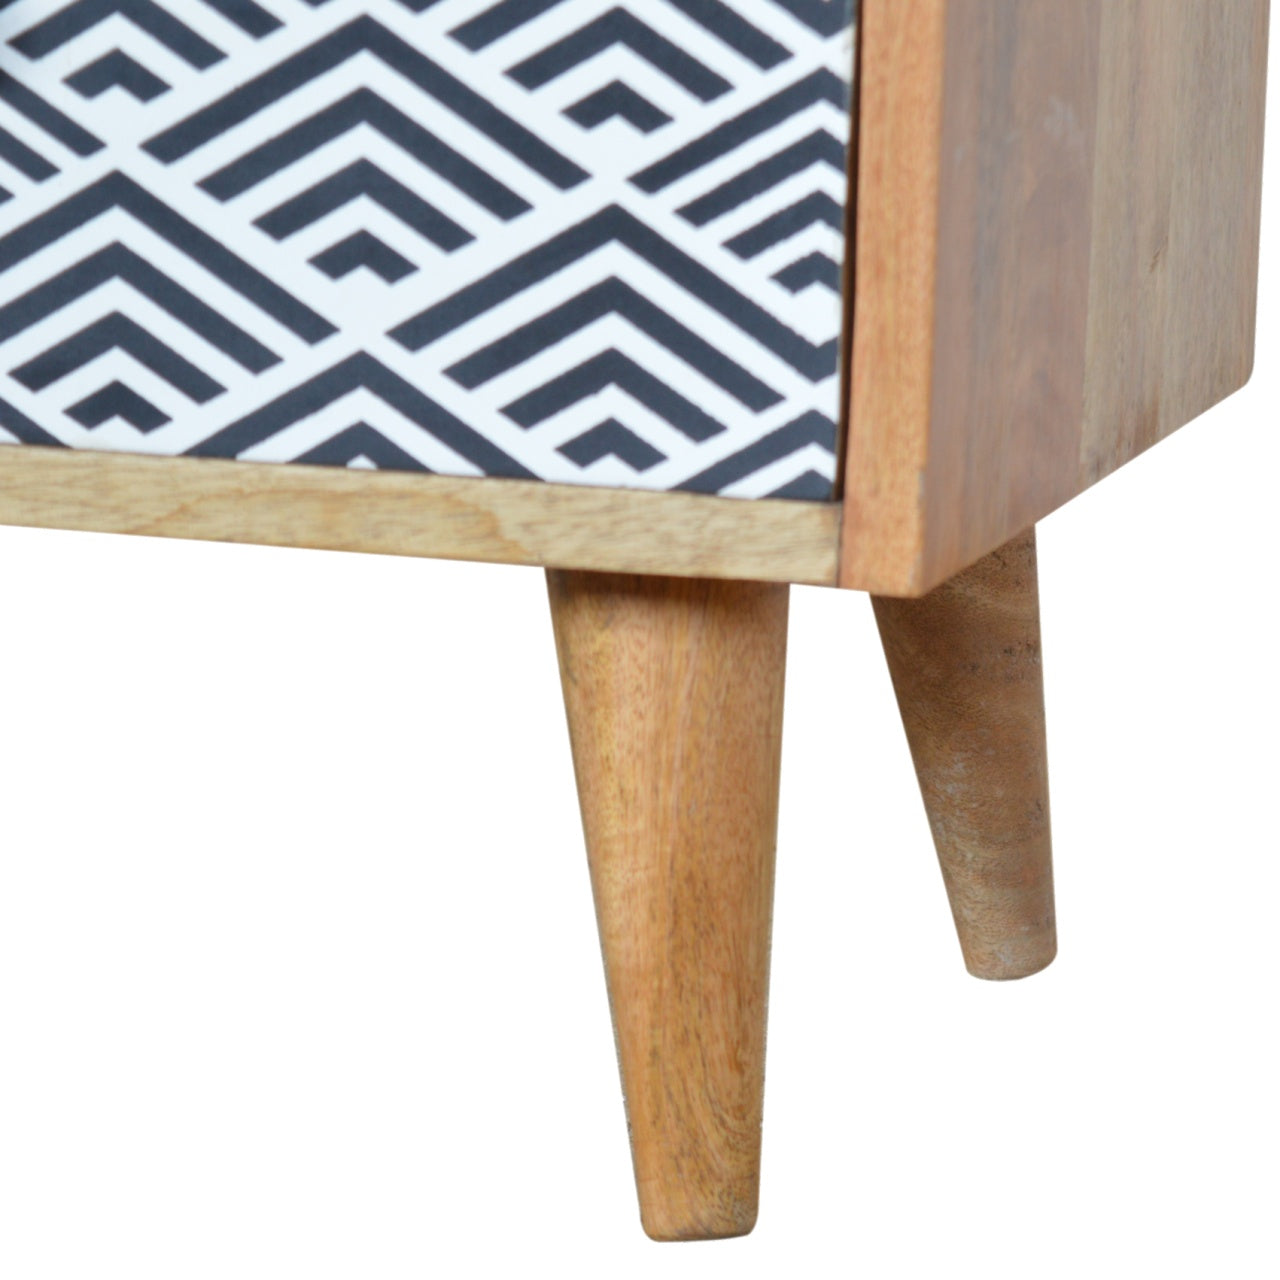 Monochrome Print Bedside Table with Open Slot